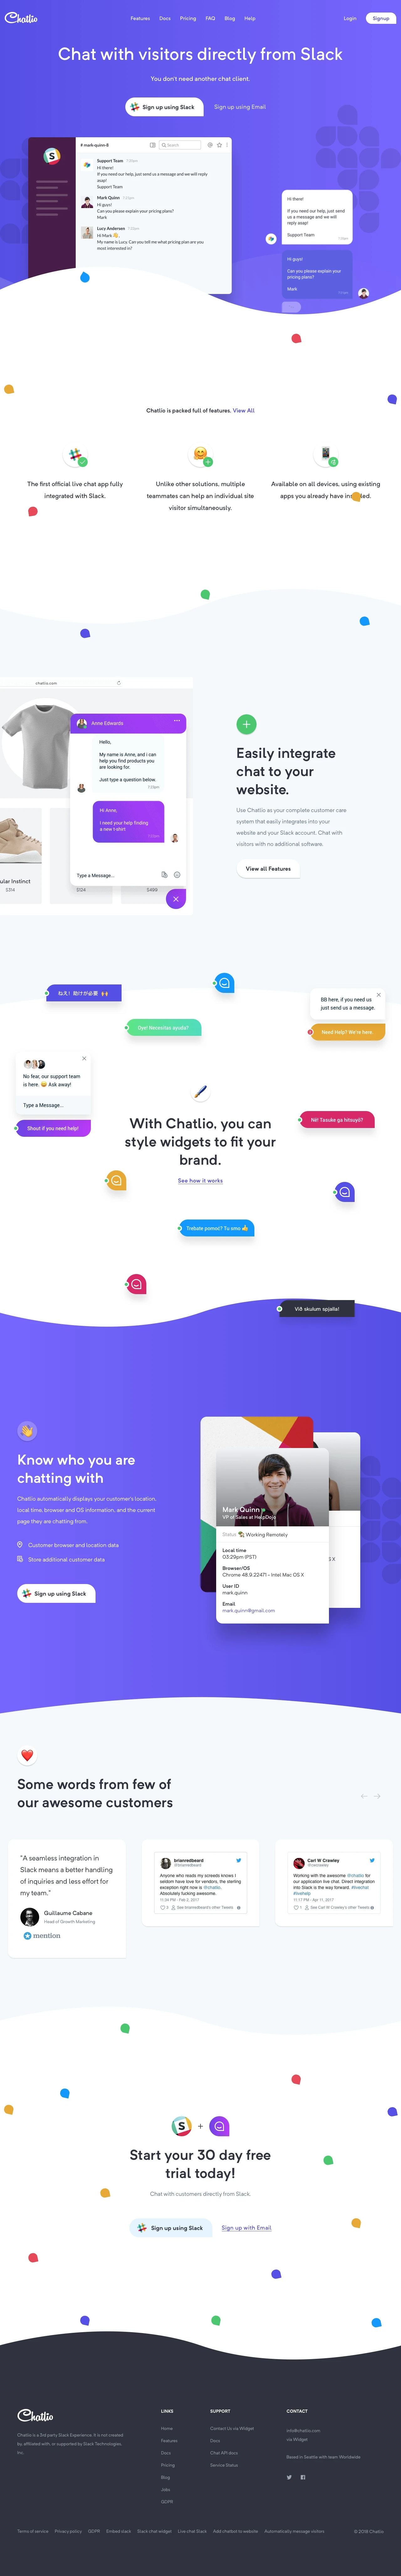 Chatlio Landing Page Example: Chat with your website visitors directly from Slack. You don’t need another chat client to talk to your customers.  Simple one minute install.